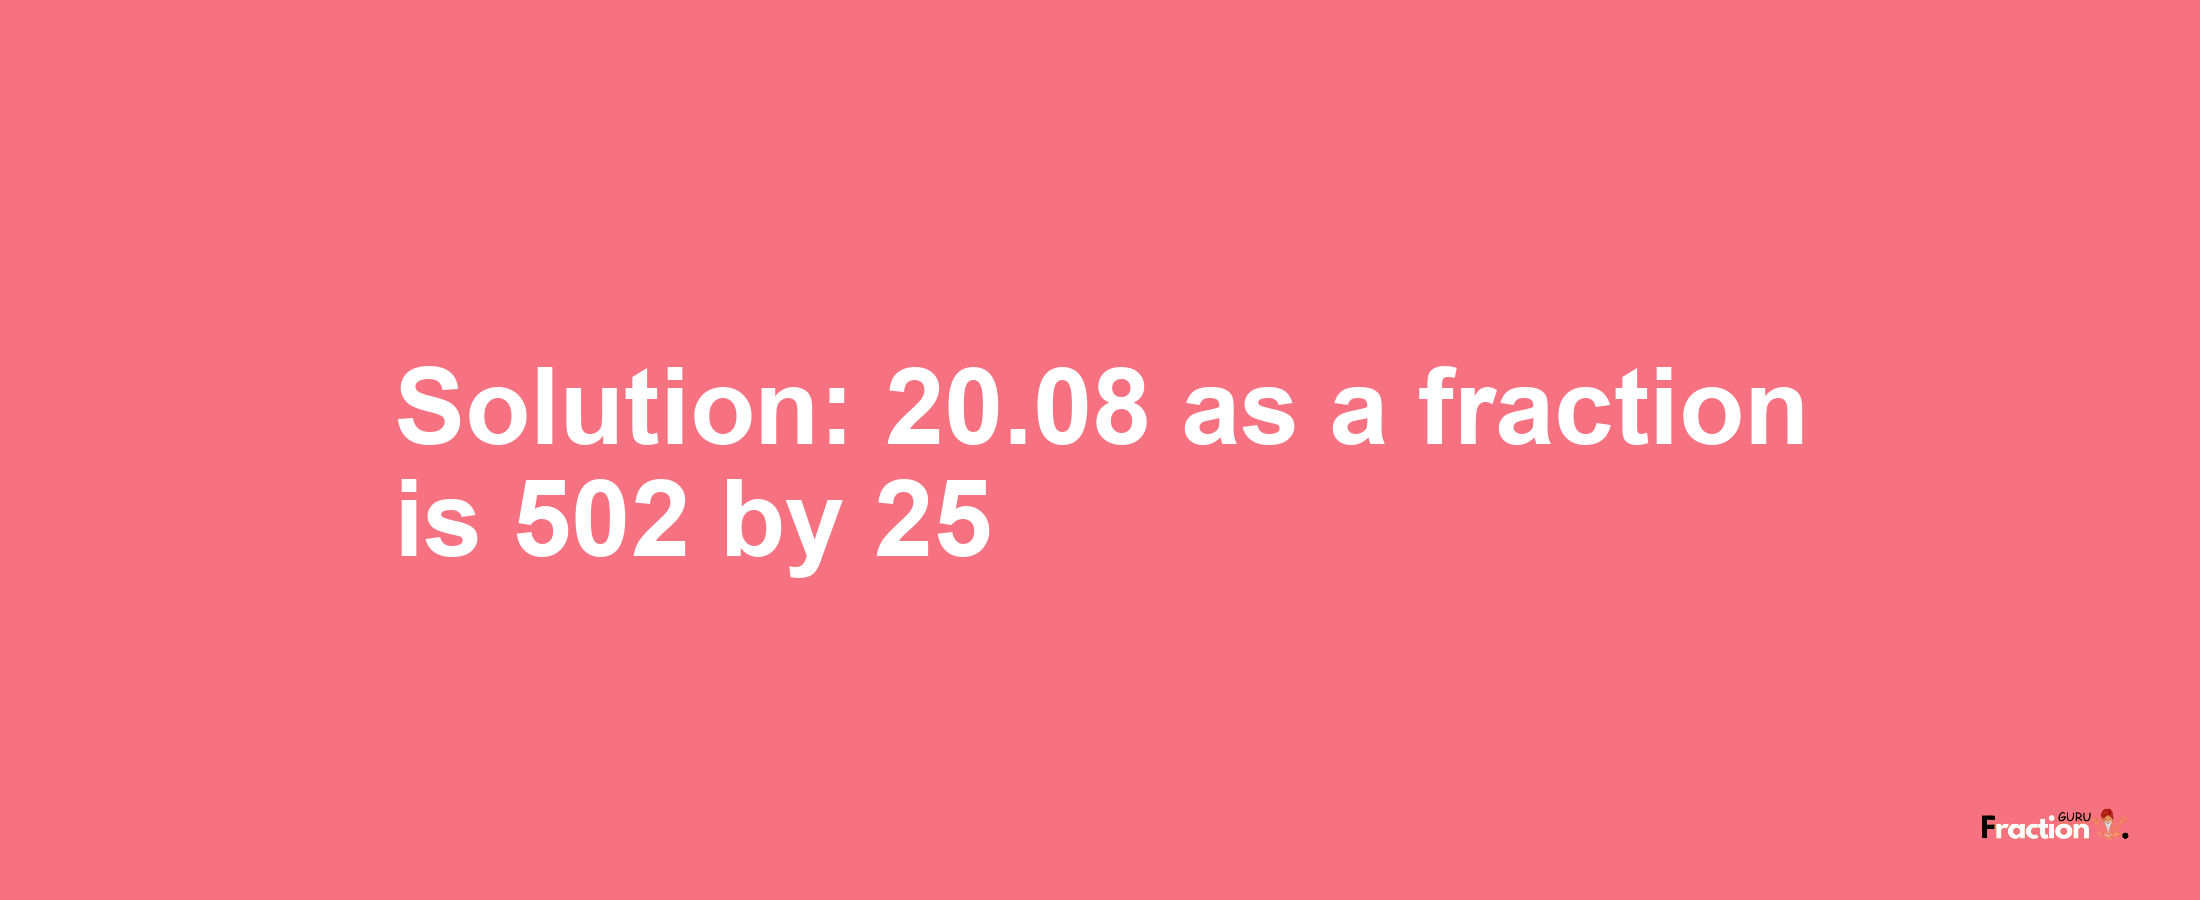 Solution:20.08 as a fraction is 502/25